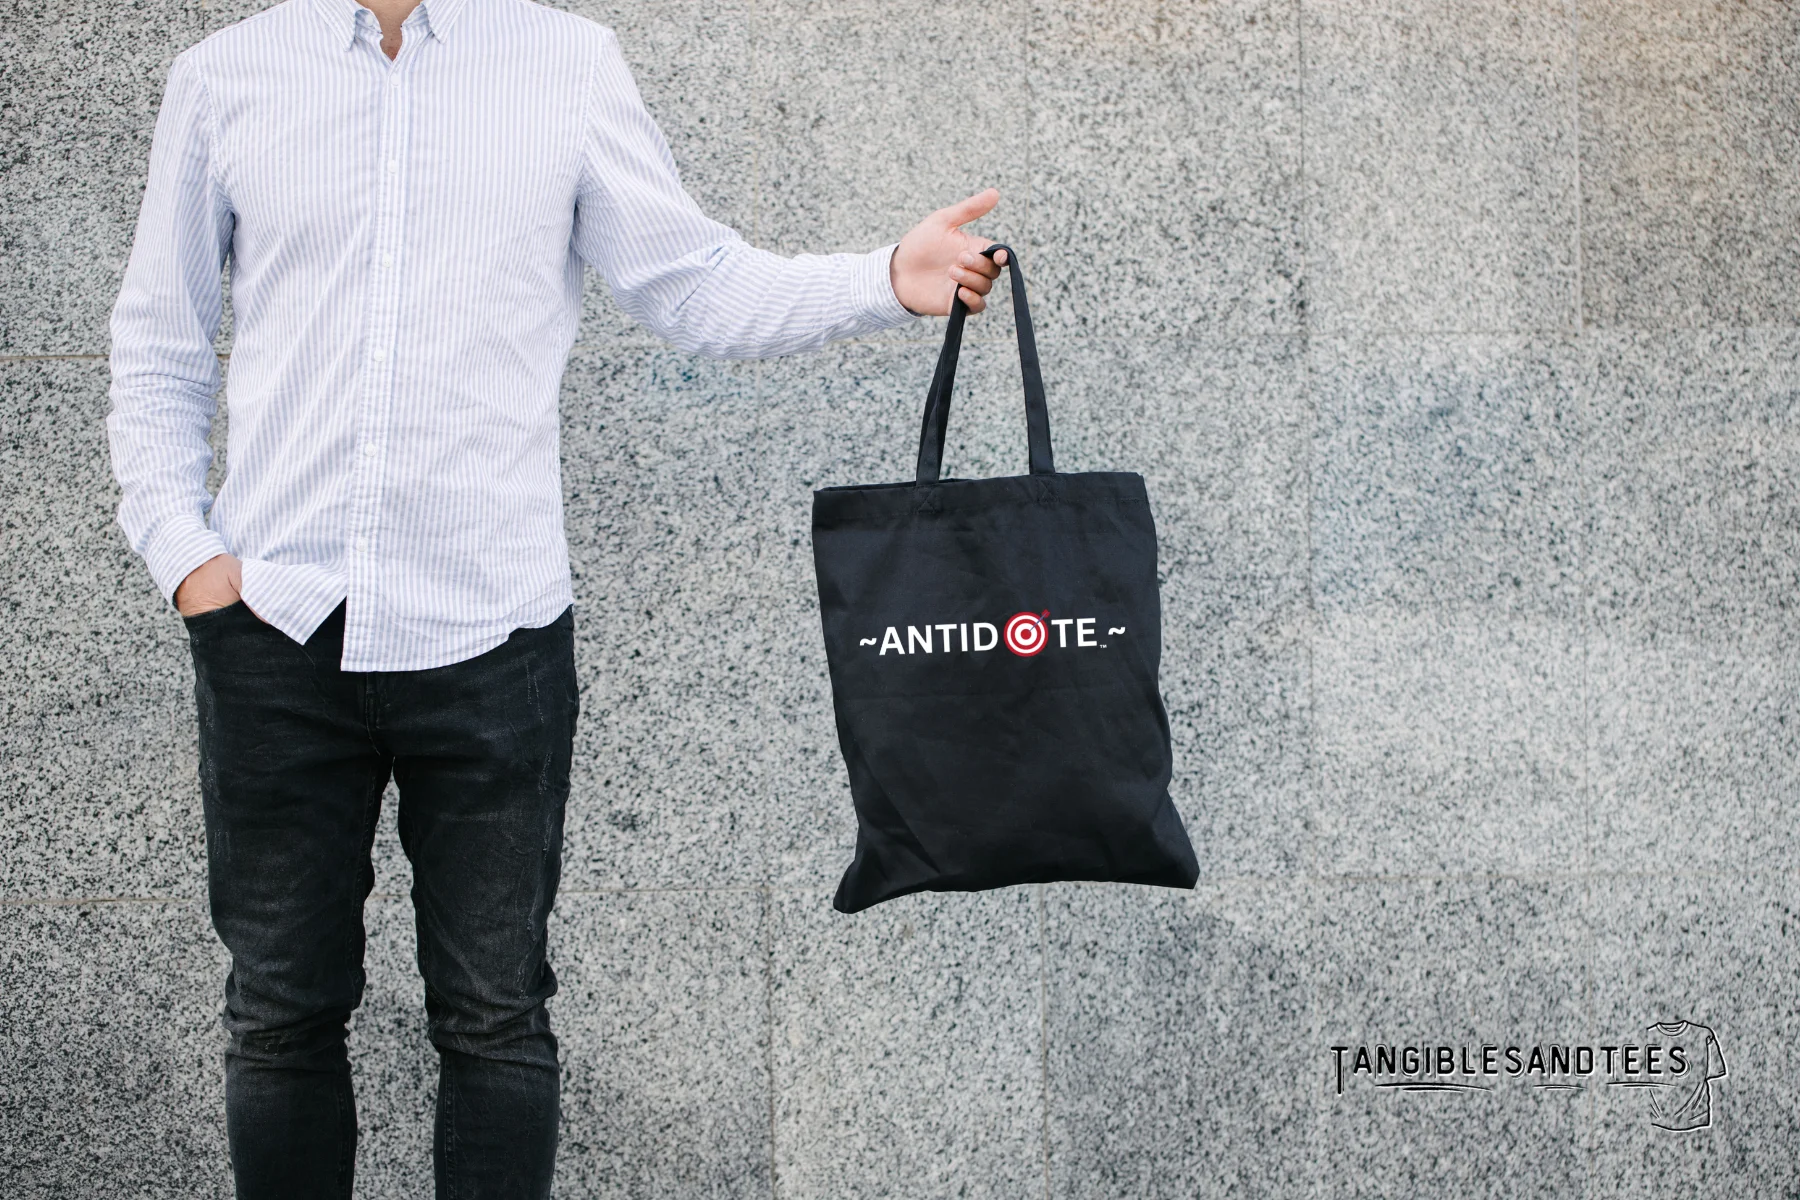 20-Antidote on tote-male